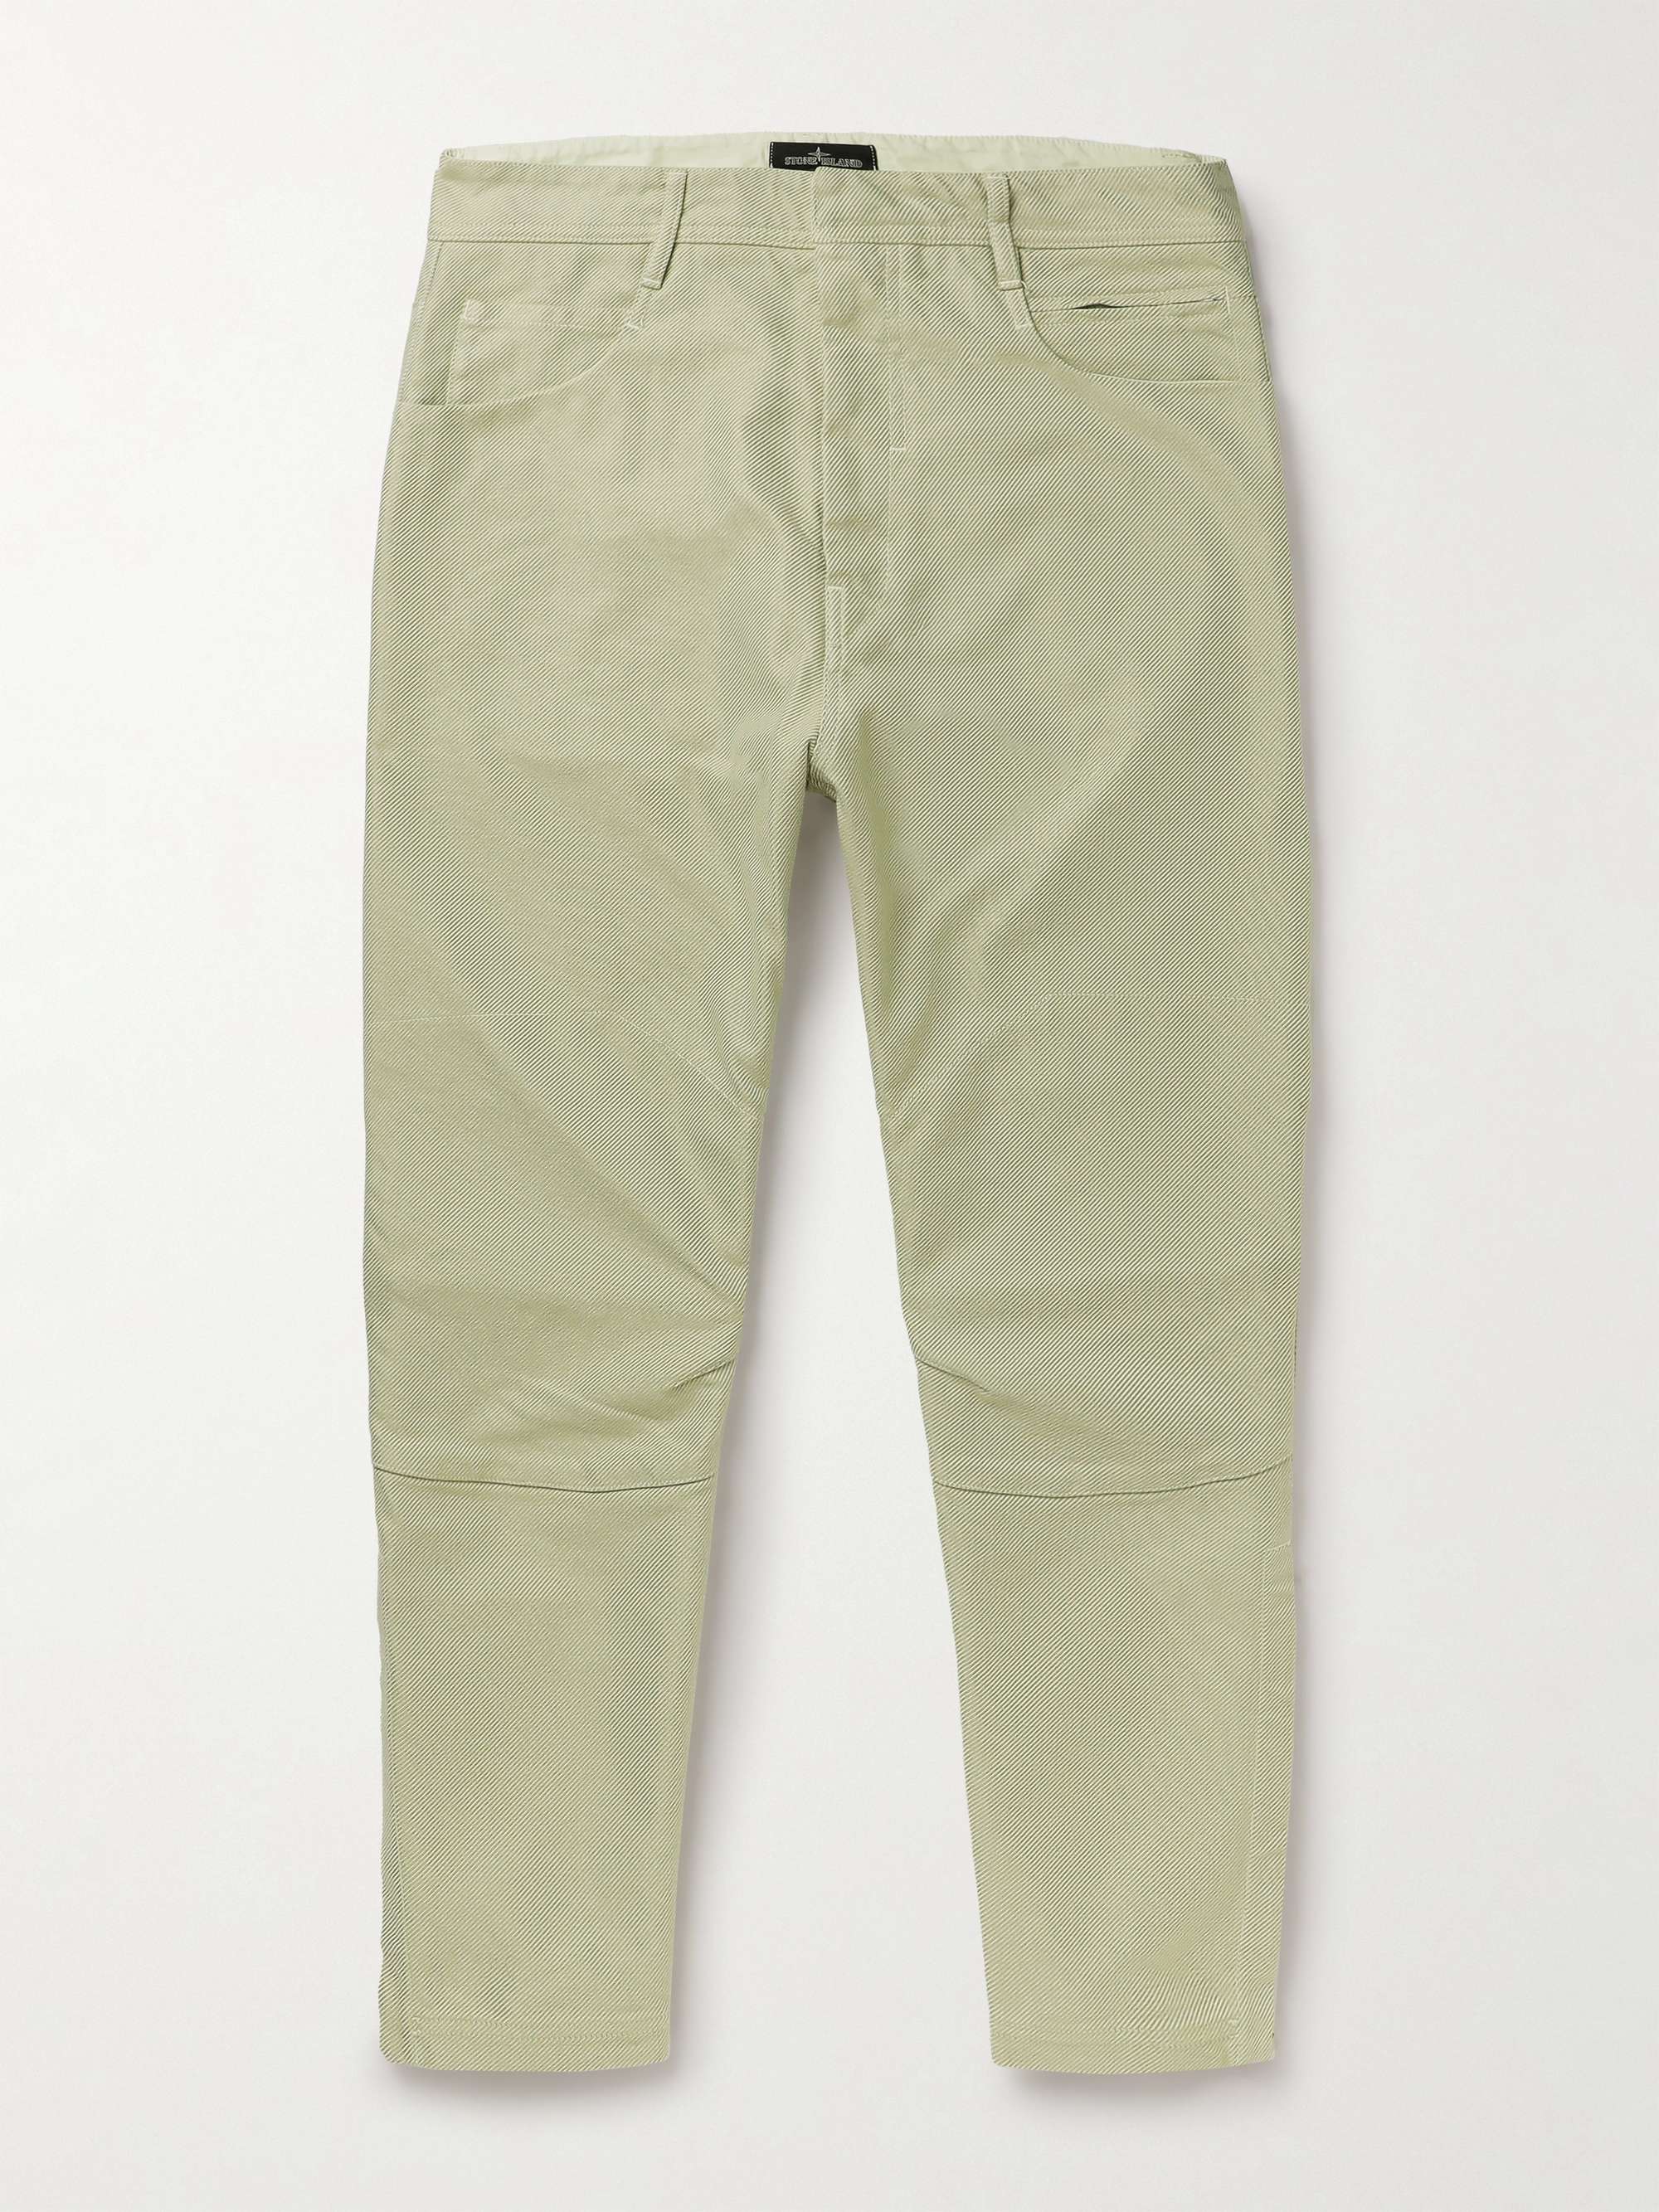 STONE ISLAND SHADOW PROJECT Garment-Dyed Straight-Leg Padded Shell Trousers  for Men